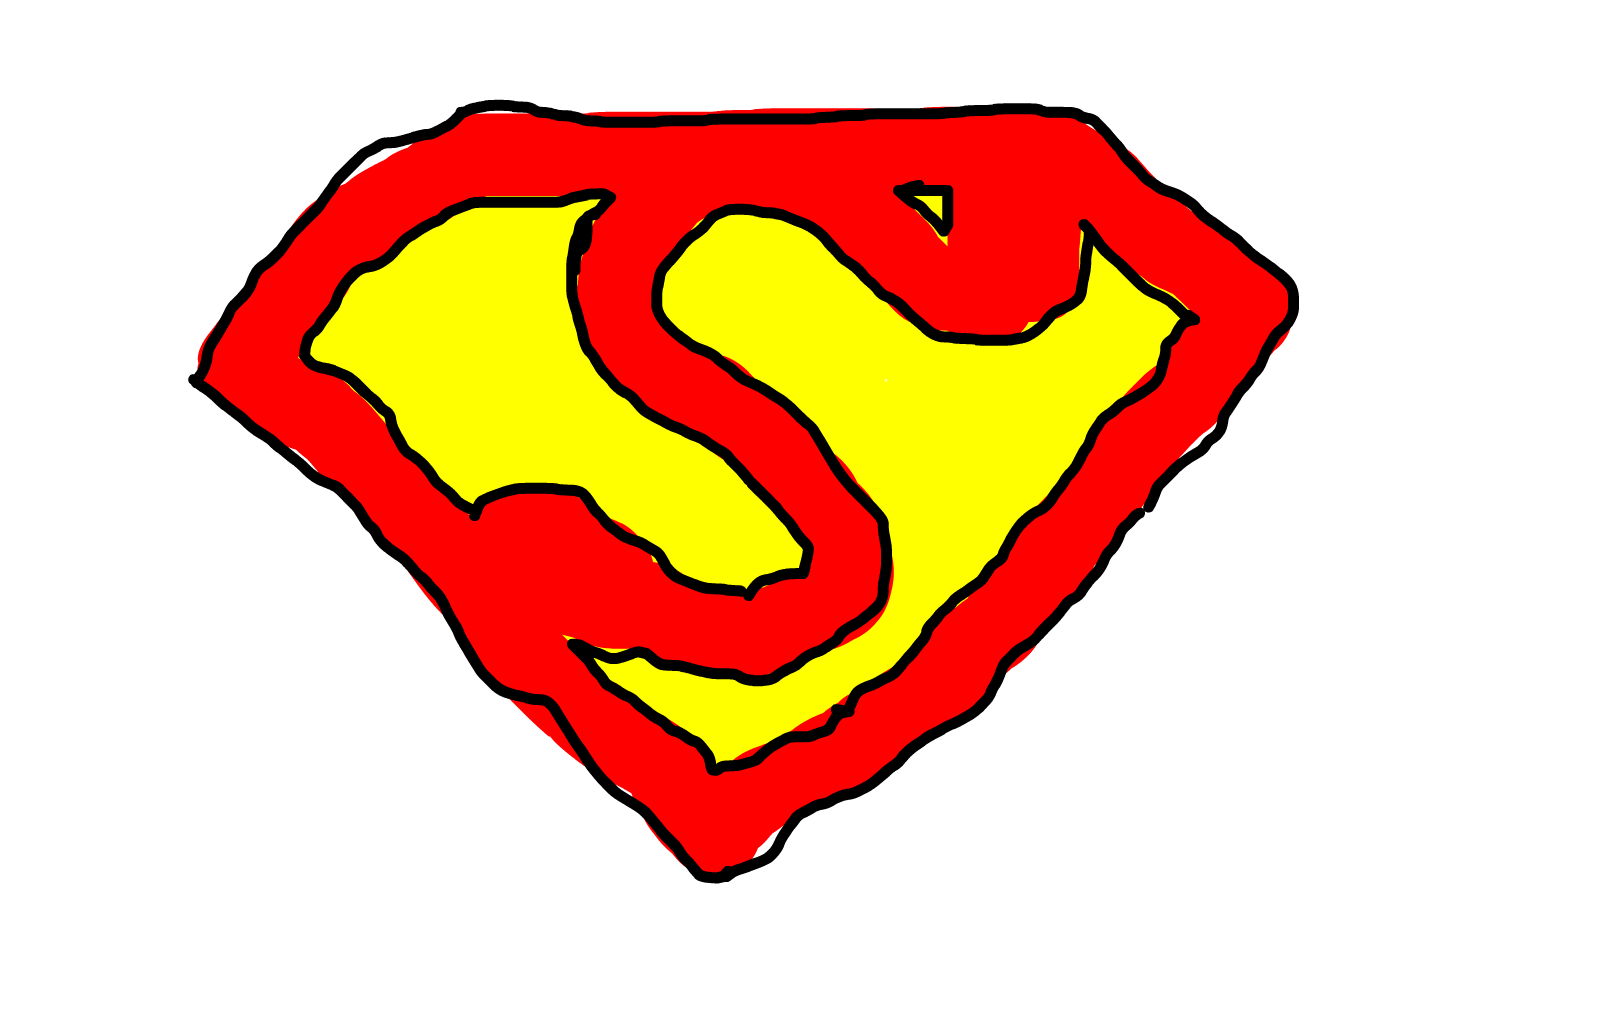 How To Draw The Superman Symbol - ClipArt Best